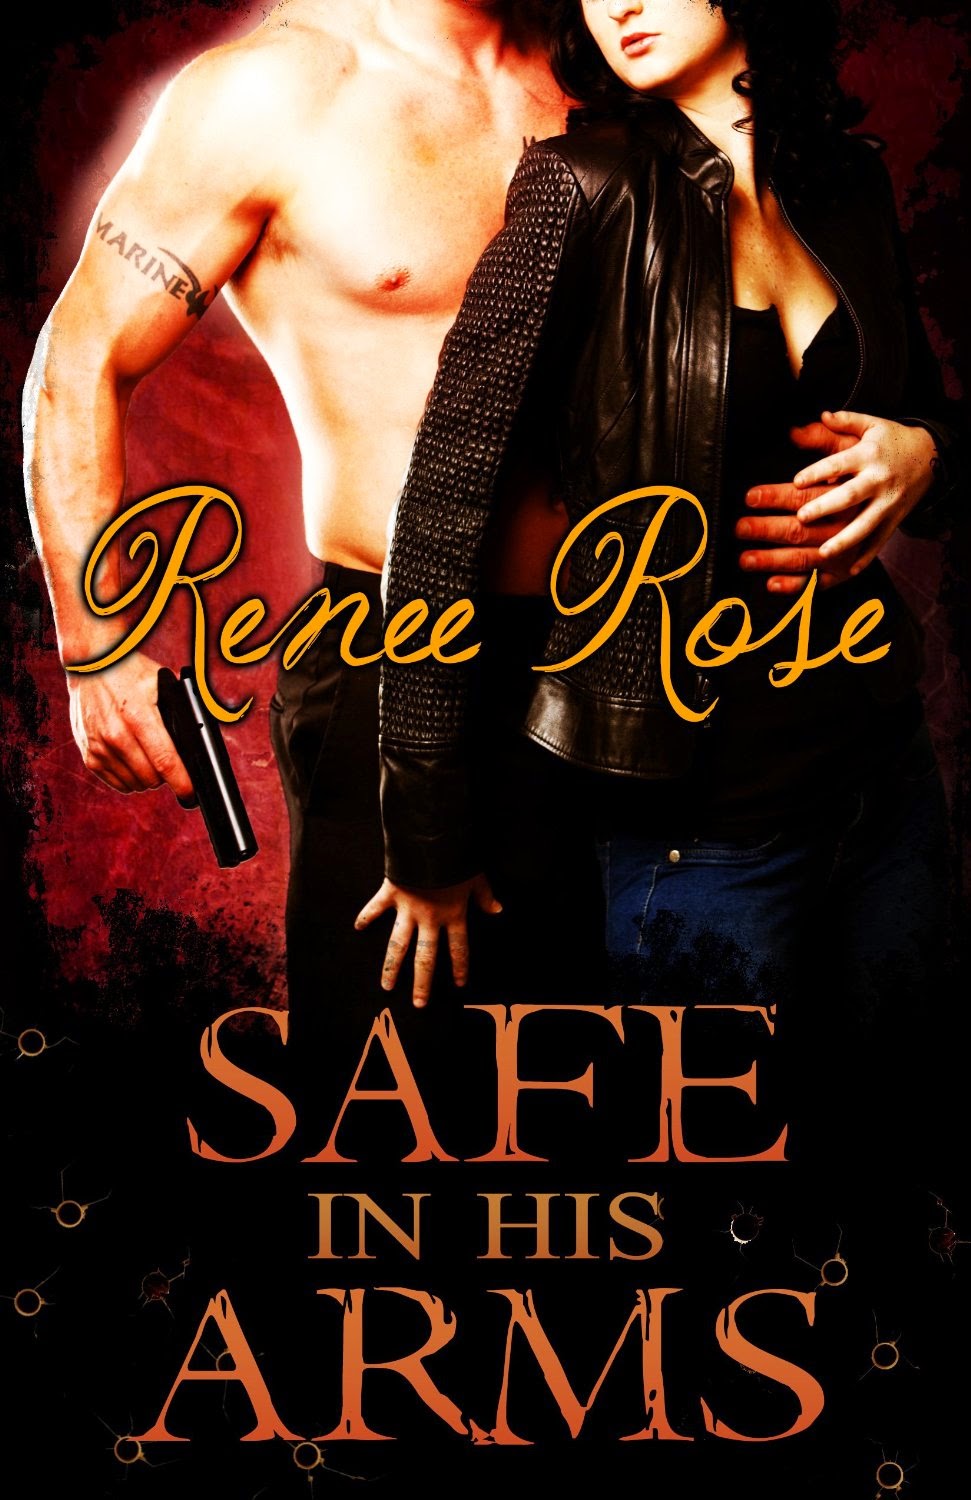 Safe in his Arms by Renee Rose